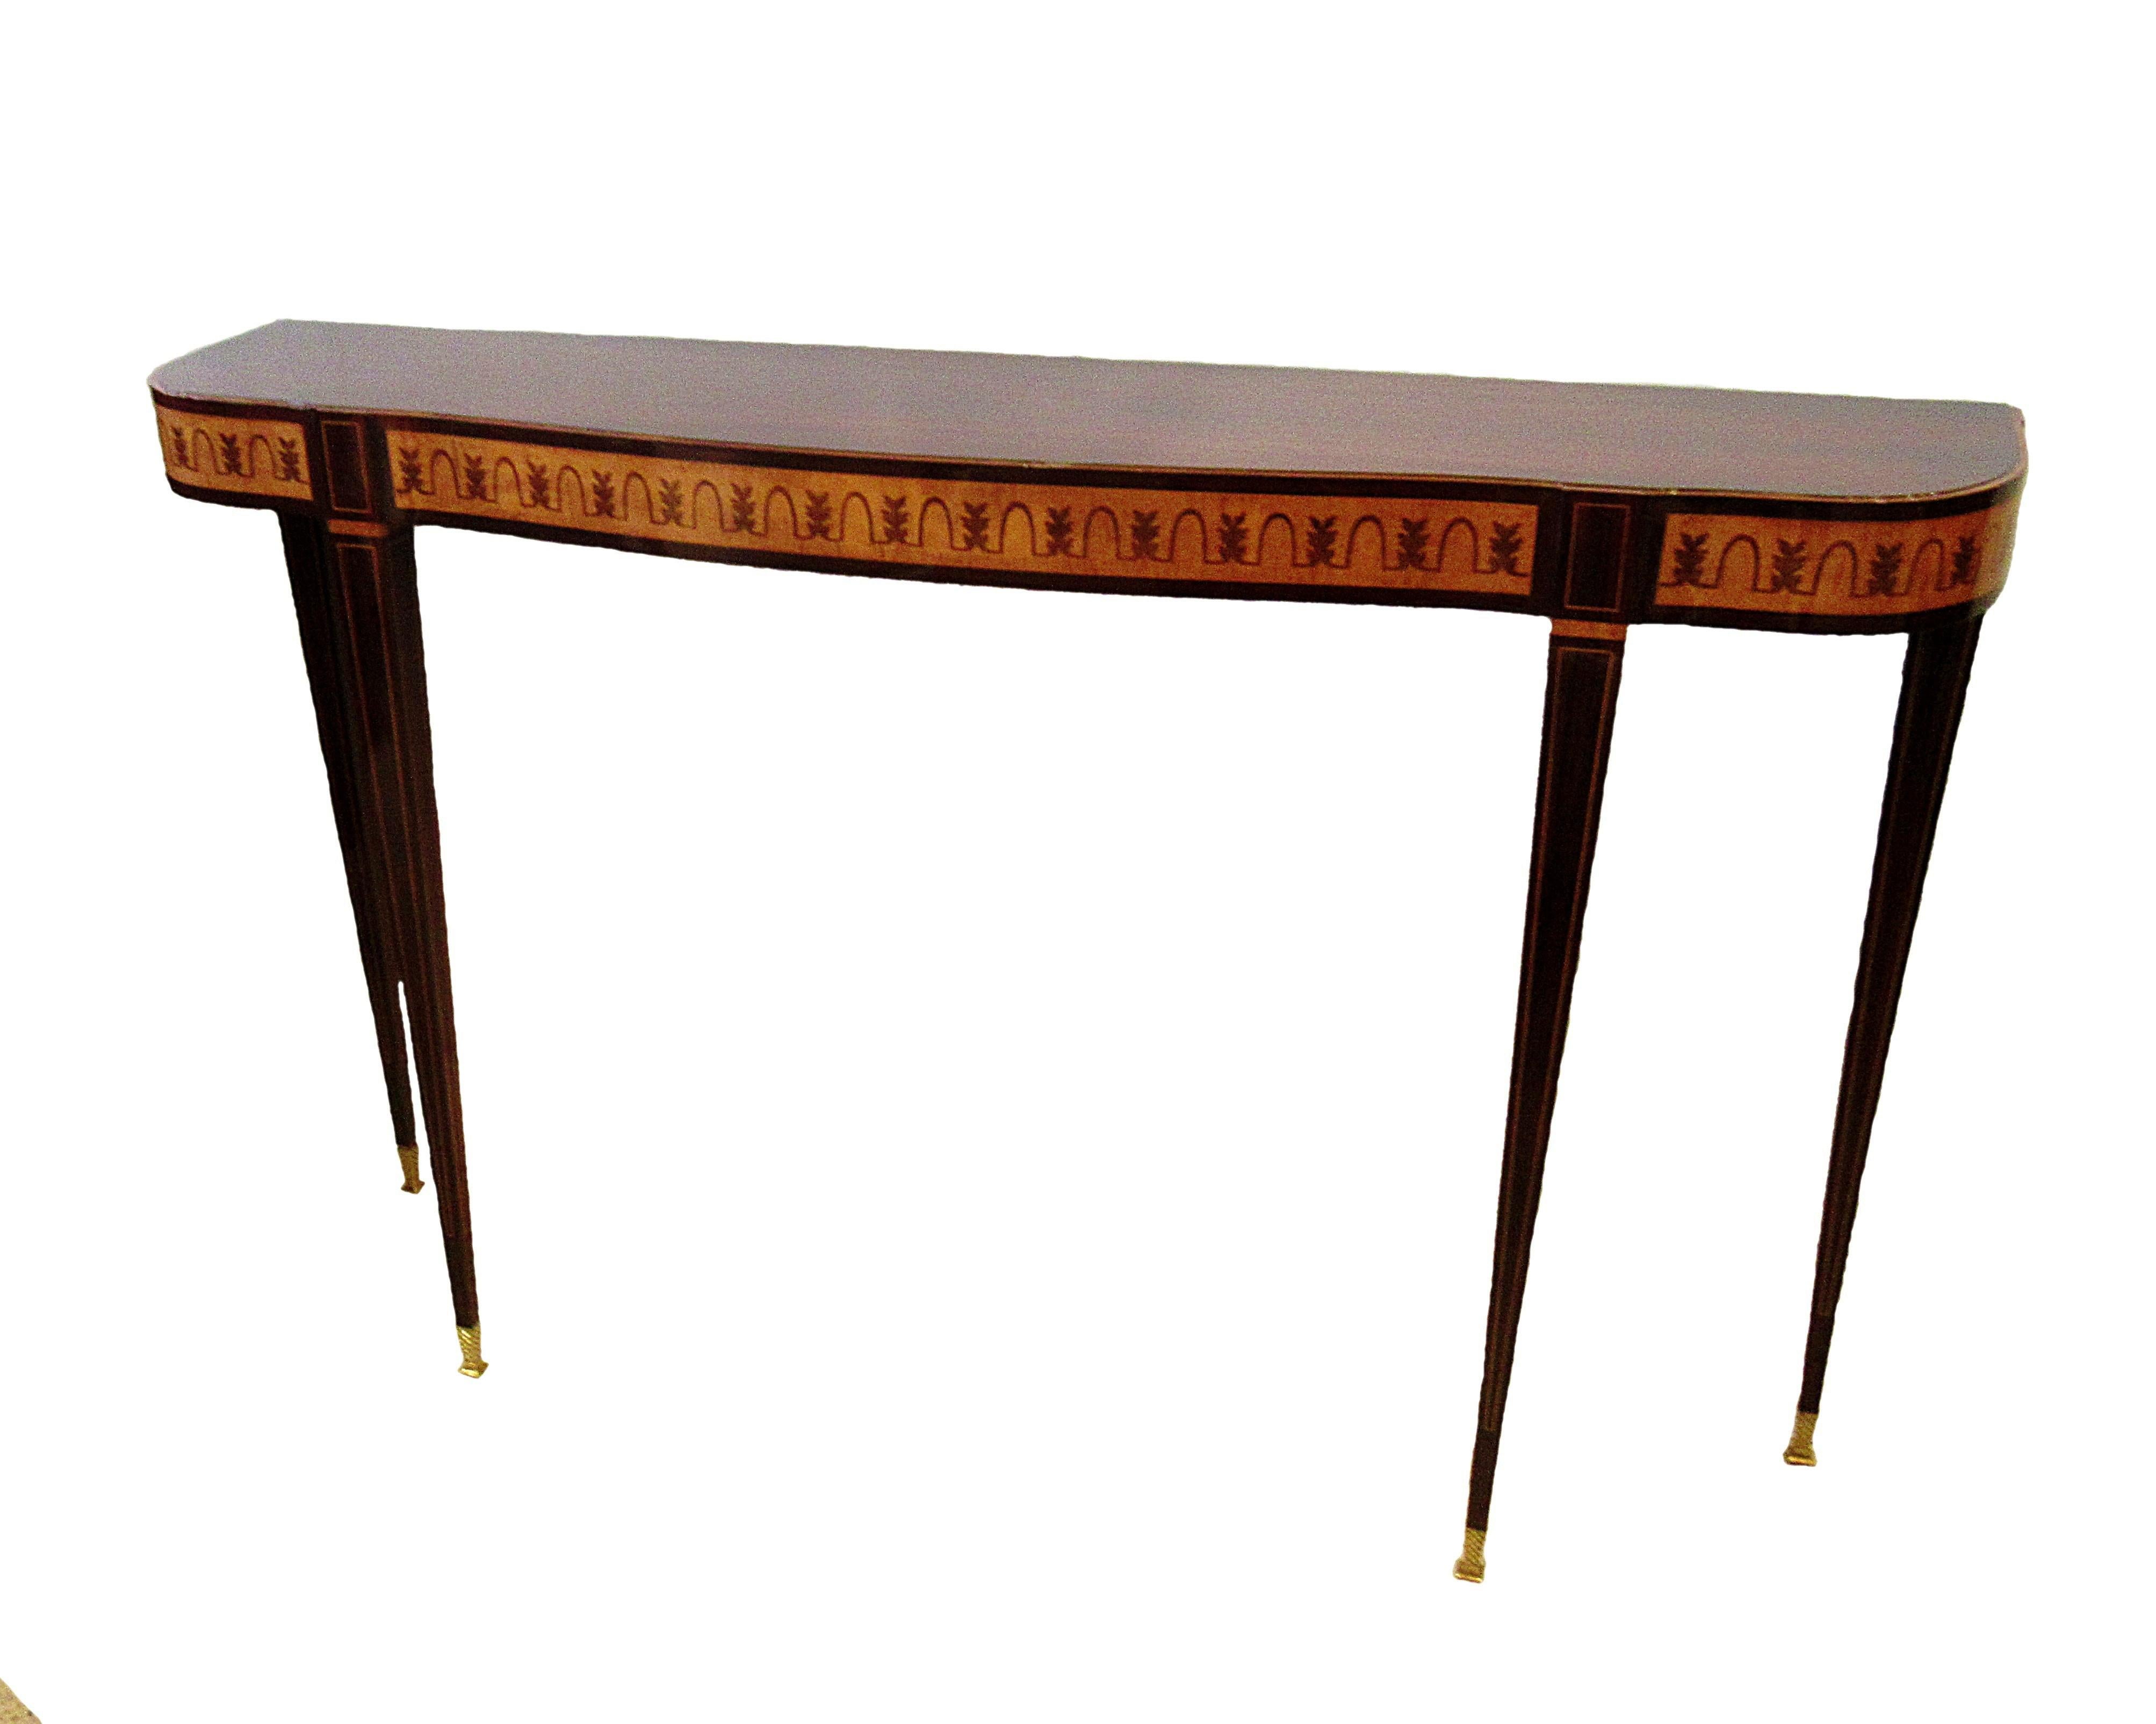 Fine Italian modern parquetry console table, the rosewood top above a frieze inlaid with rosewood and walnut classical motif on square tapering legs with band inlay, terminating with sabots. This is classic Paolo buffa, incorporating 18th century